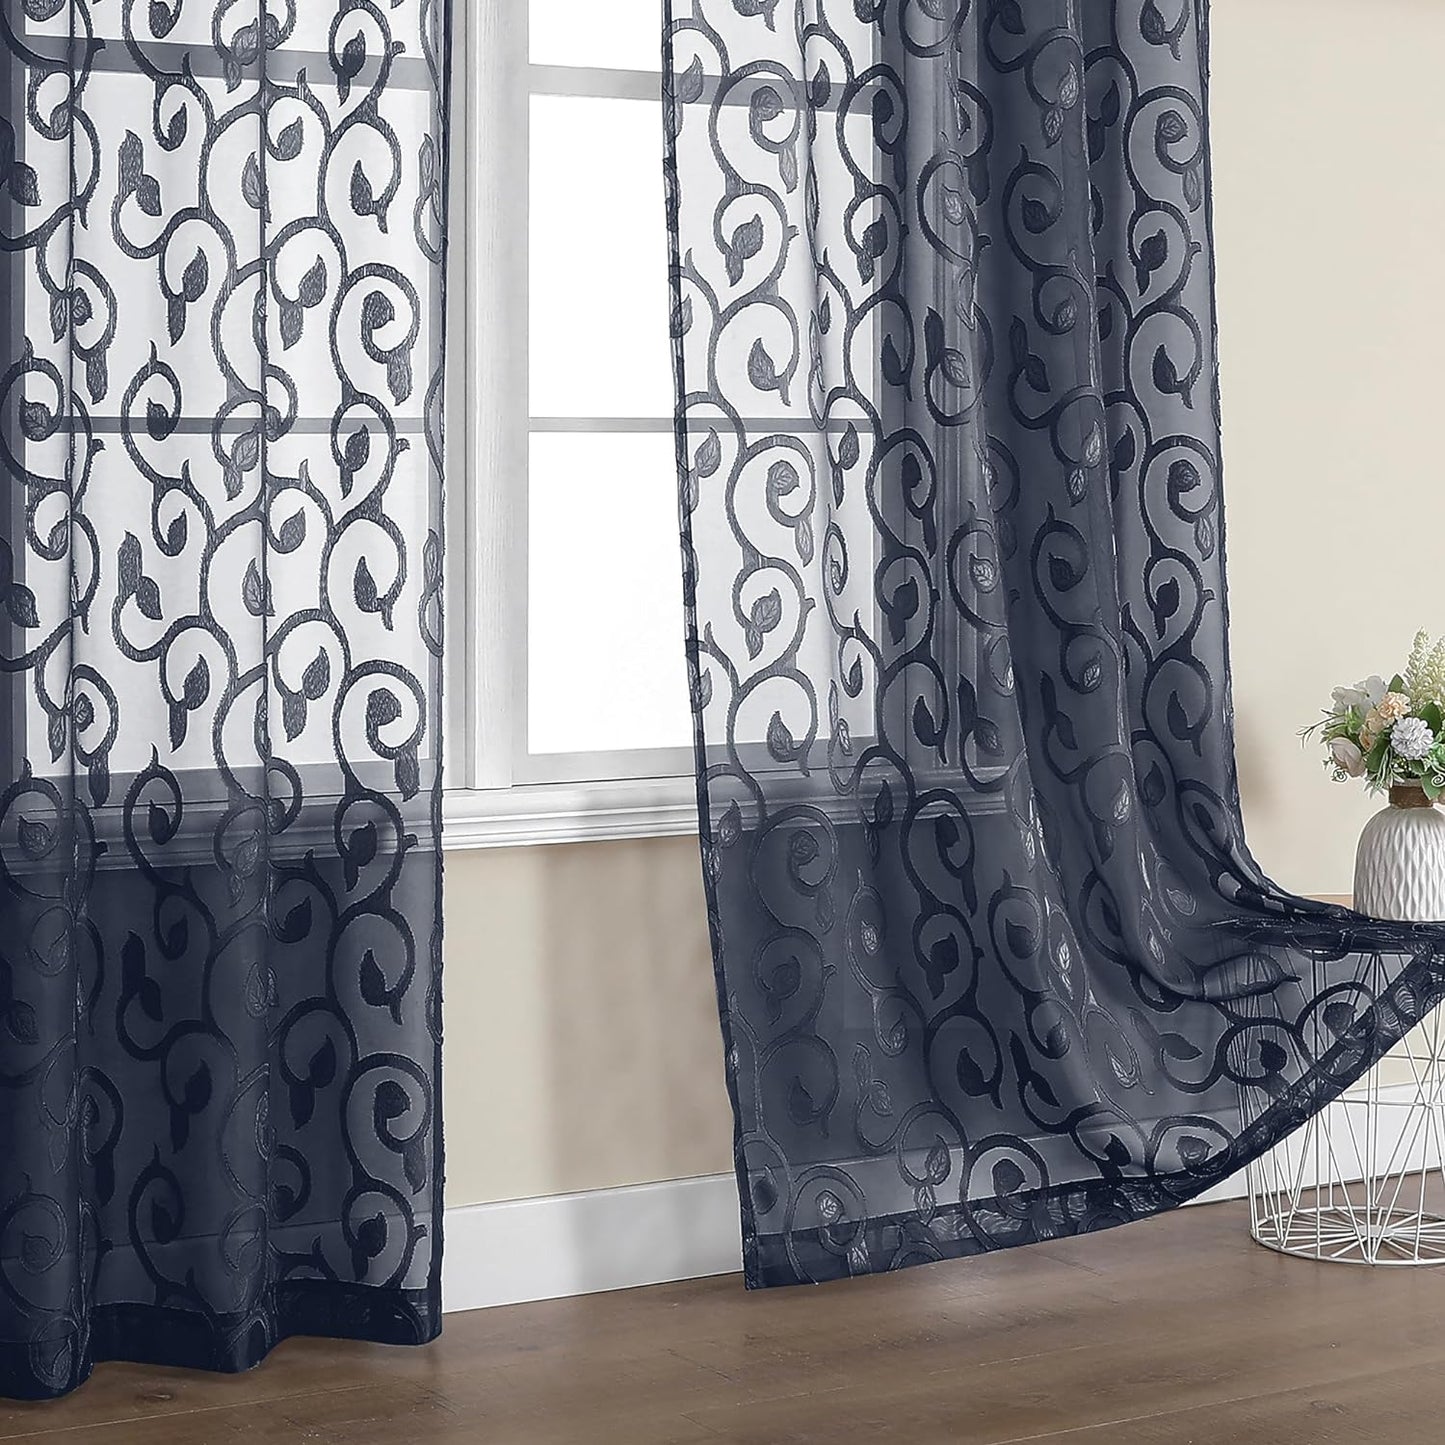 OWENIE Furman Sheer Curtains 84 Inches Long for Bedroom Living Room 2 Panels Set, Light Filtering Window Curtains, Semi Transparent Voile Top Dual Rod Pocket, Grey, 40Wx84L Inch, Total 84 Inches Width  OWENIE Navy Blue 40W X 72L 